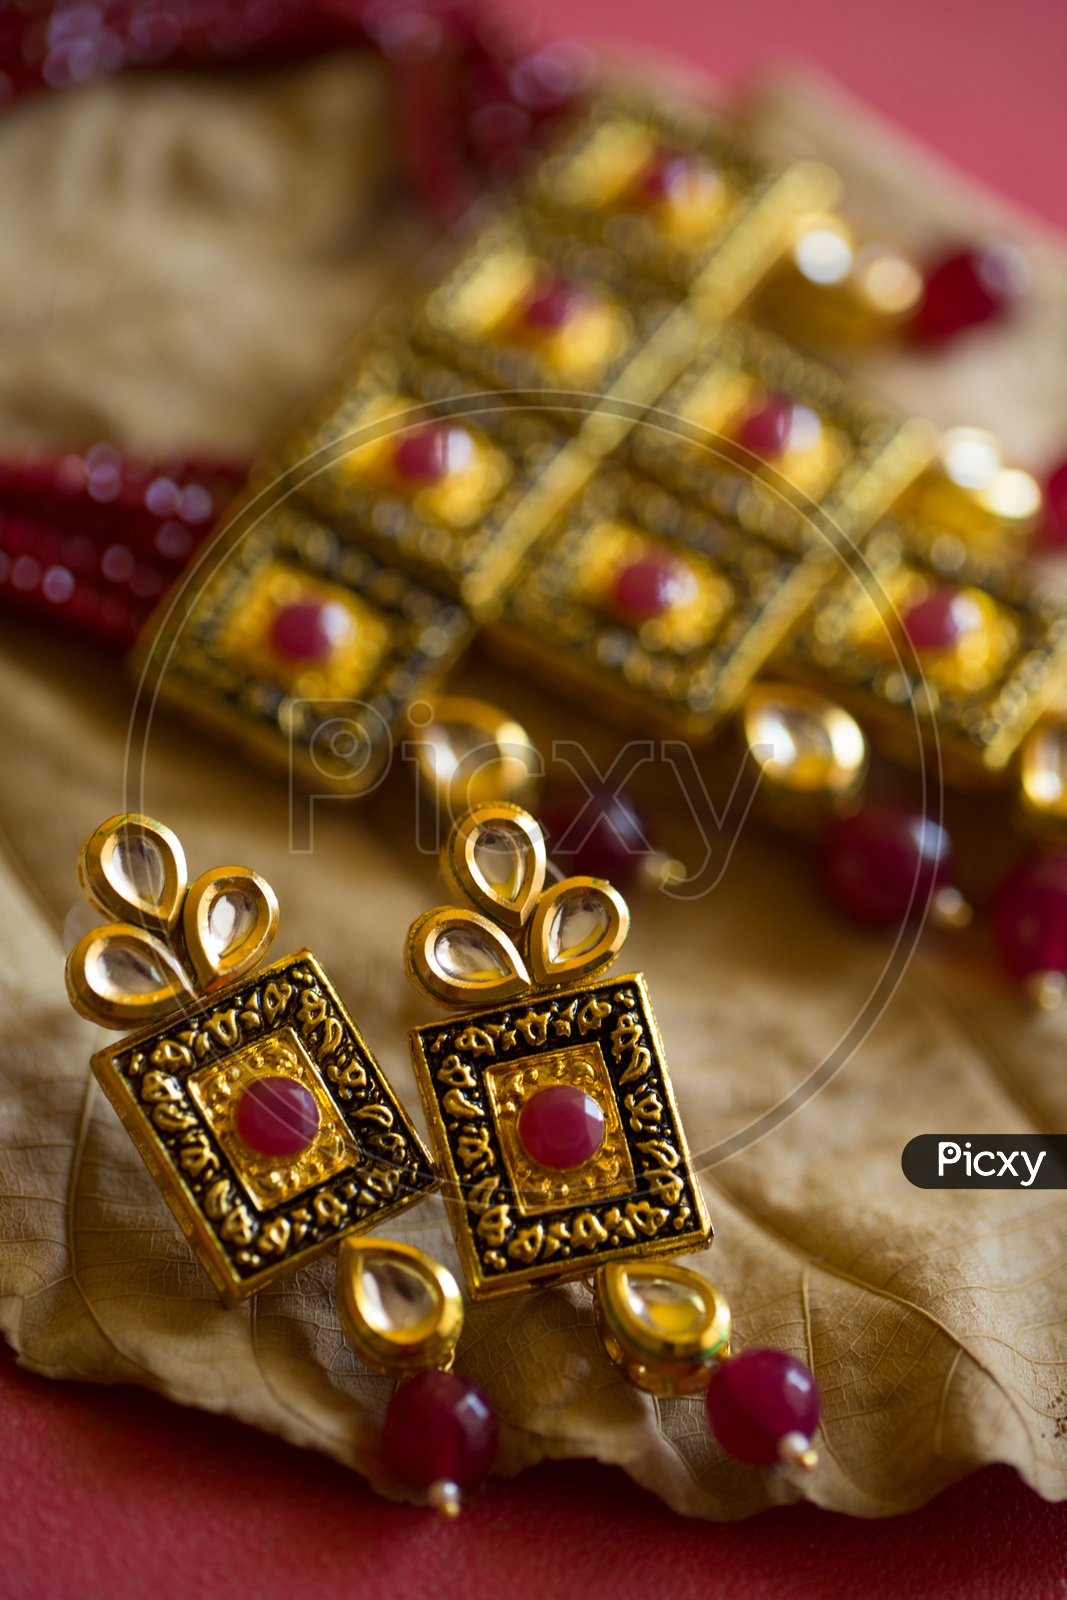 Indian Traditionally Made Designs For Bridal Collection of Gold Jewellery Necklace and Ear Rings Set Closeup Shot